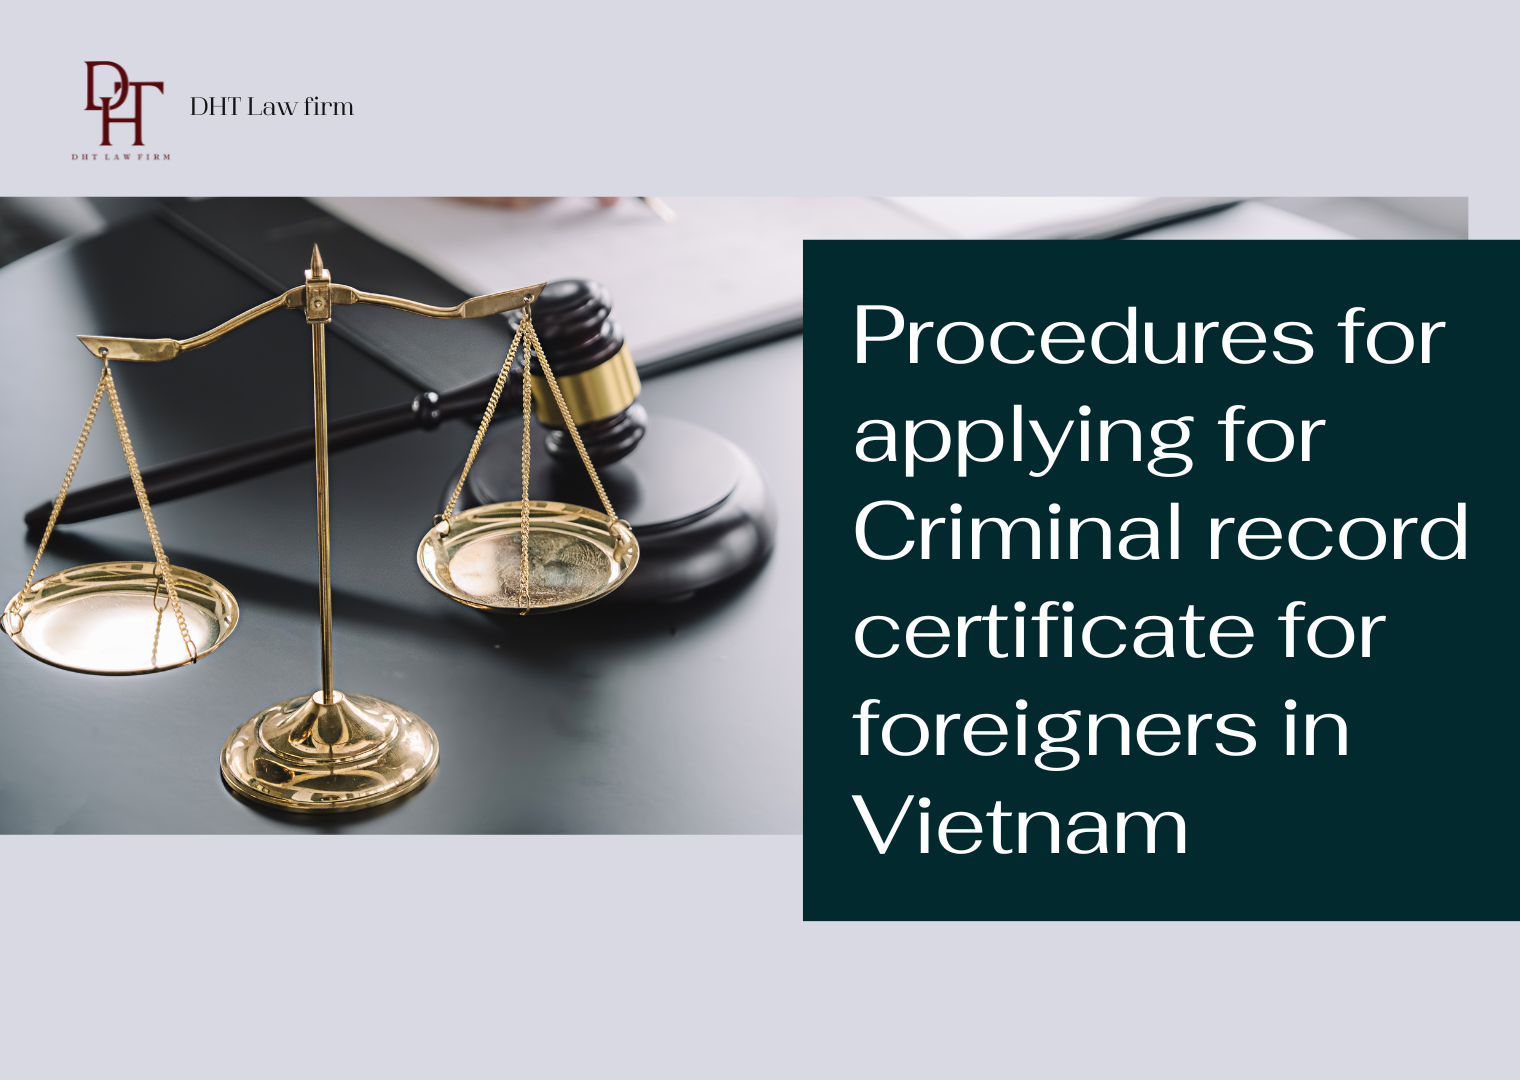 PROCEDURES FOR APPLYING FOR CRIMINAL RECORD CERTIFICATE FOR FOREIGNERS IN VIETNAM